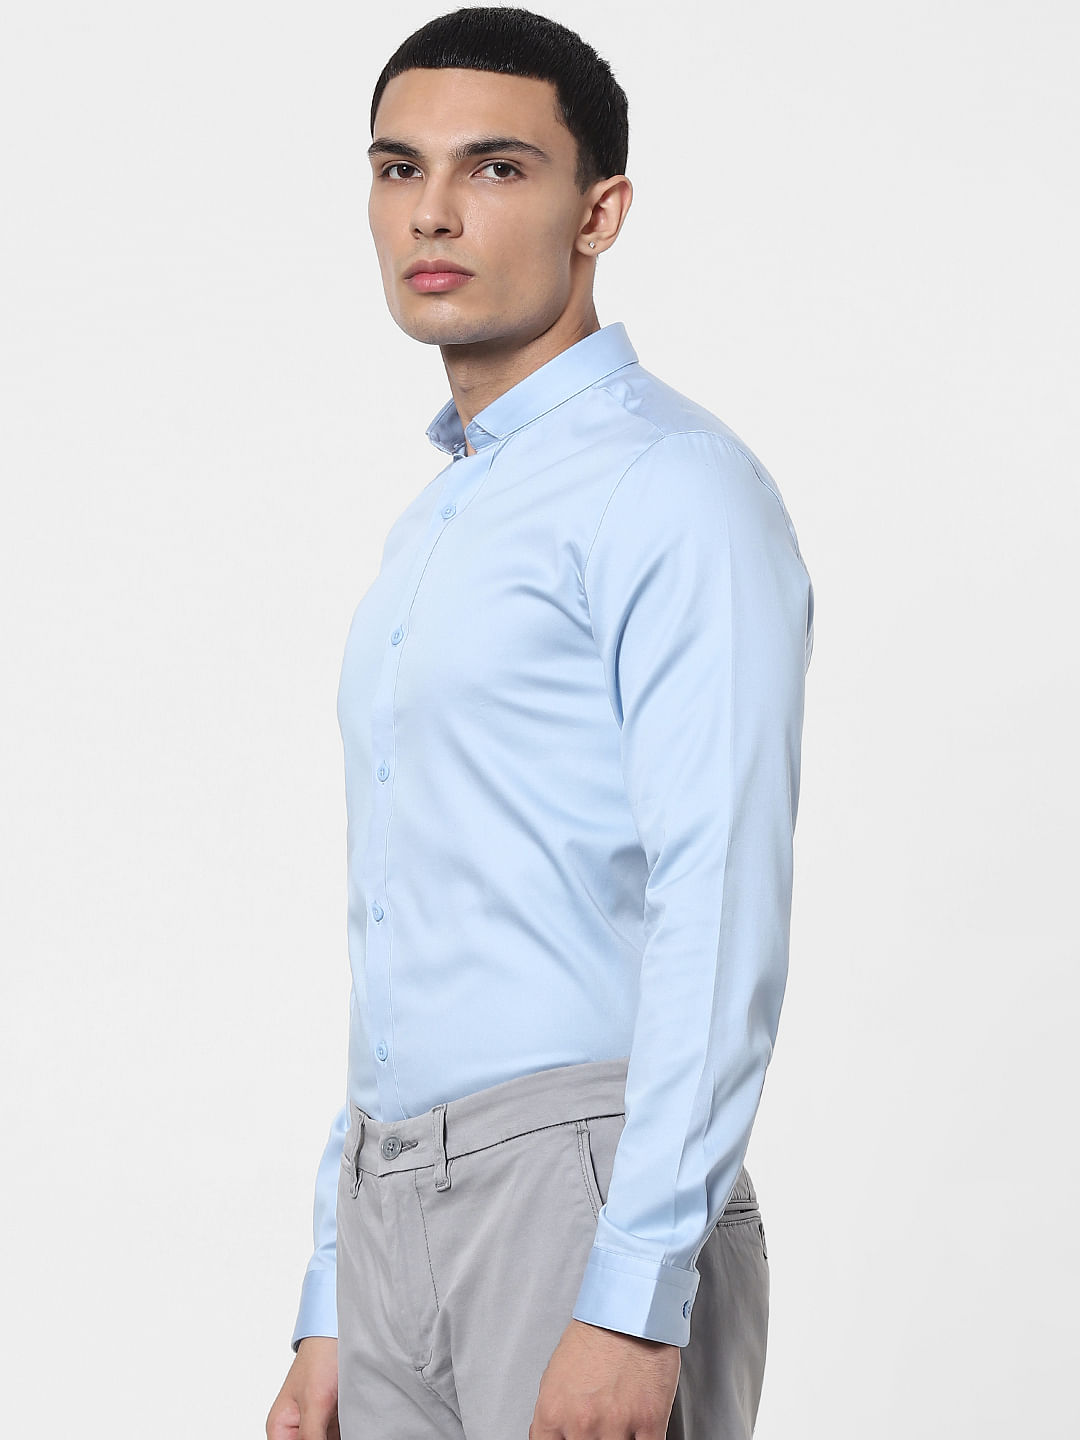 How To Wear Blue  Gray  Color Combinations For Blues  Greys In Menswear